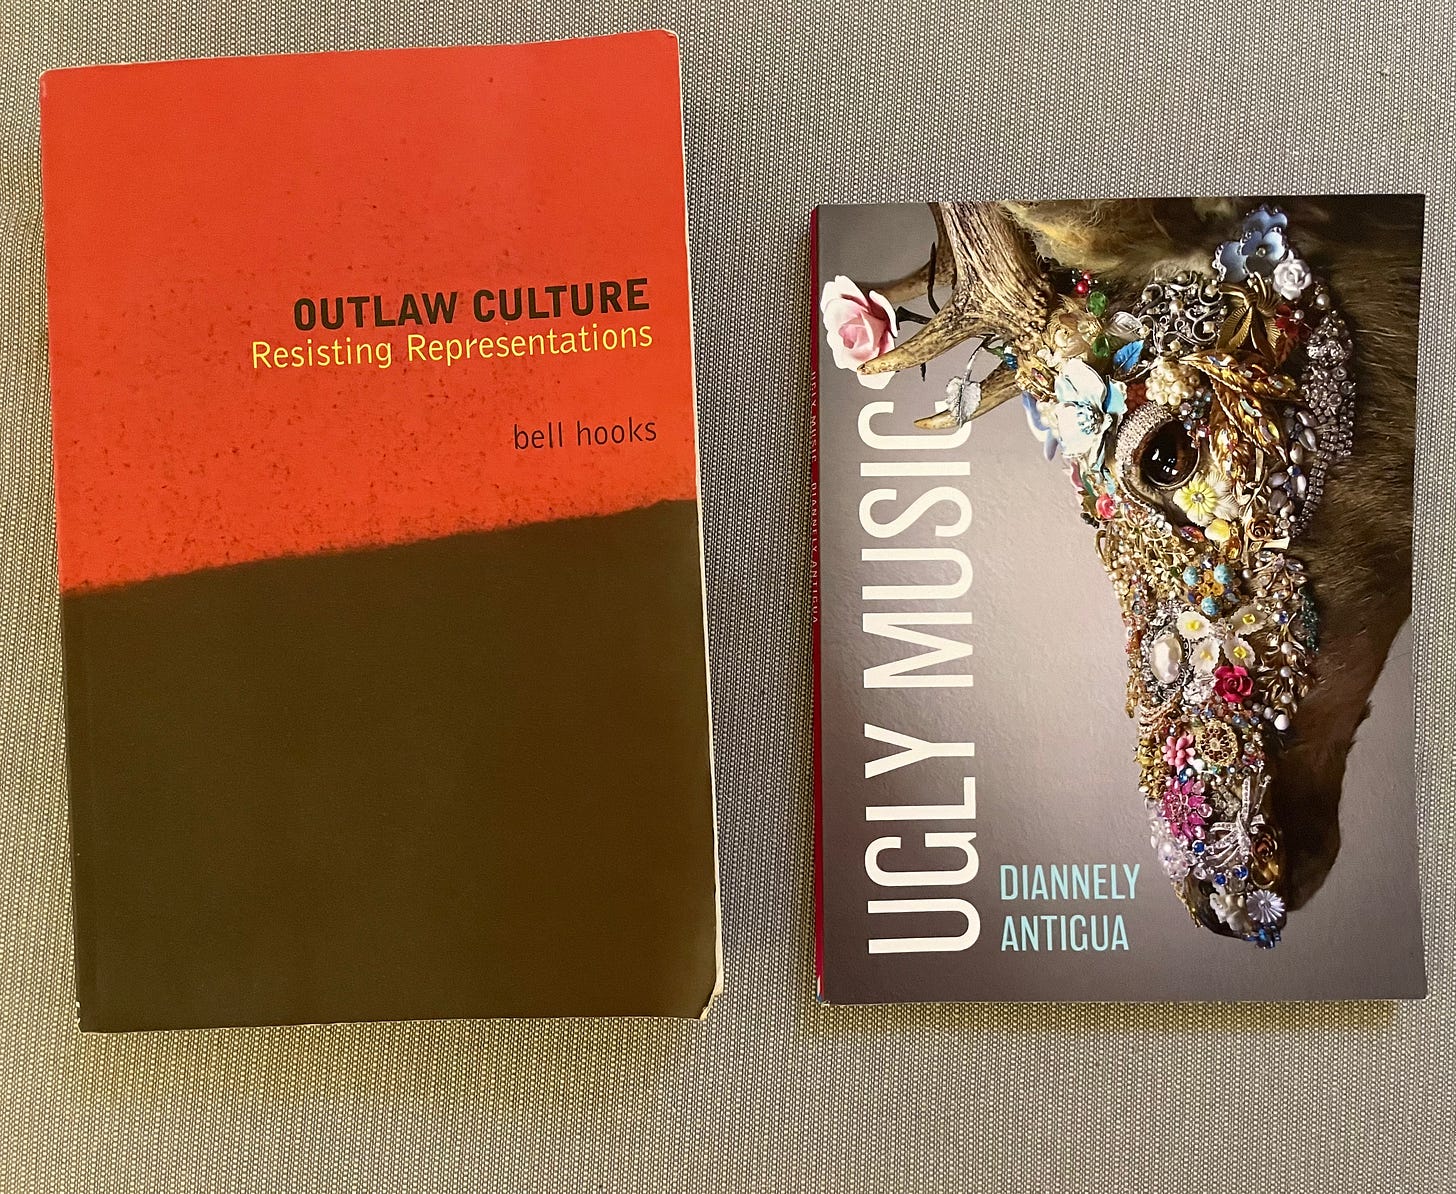 Outlaw Culture by bell hooks and Ugly Music by Diannely Antigua